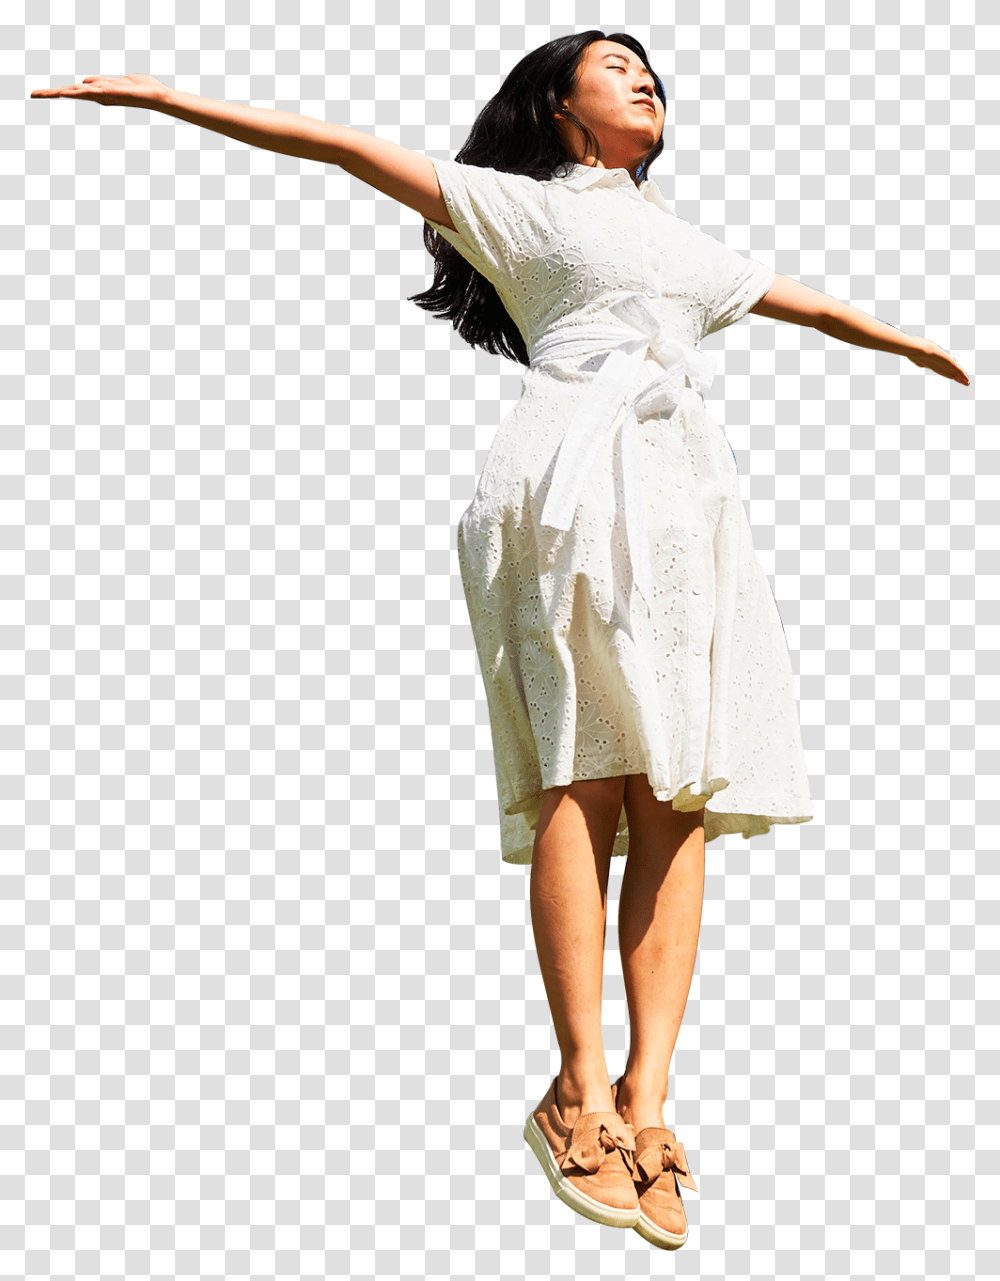 Like The National Gallery Singapore And The Asian Civilisations Photo Shoot, Person, Dress, Dance Pose Transparent Png